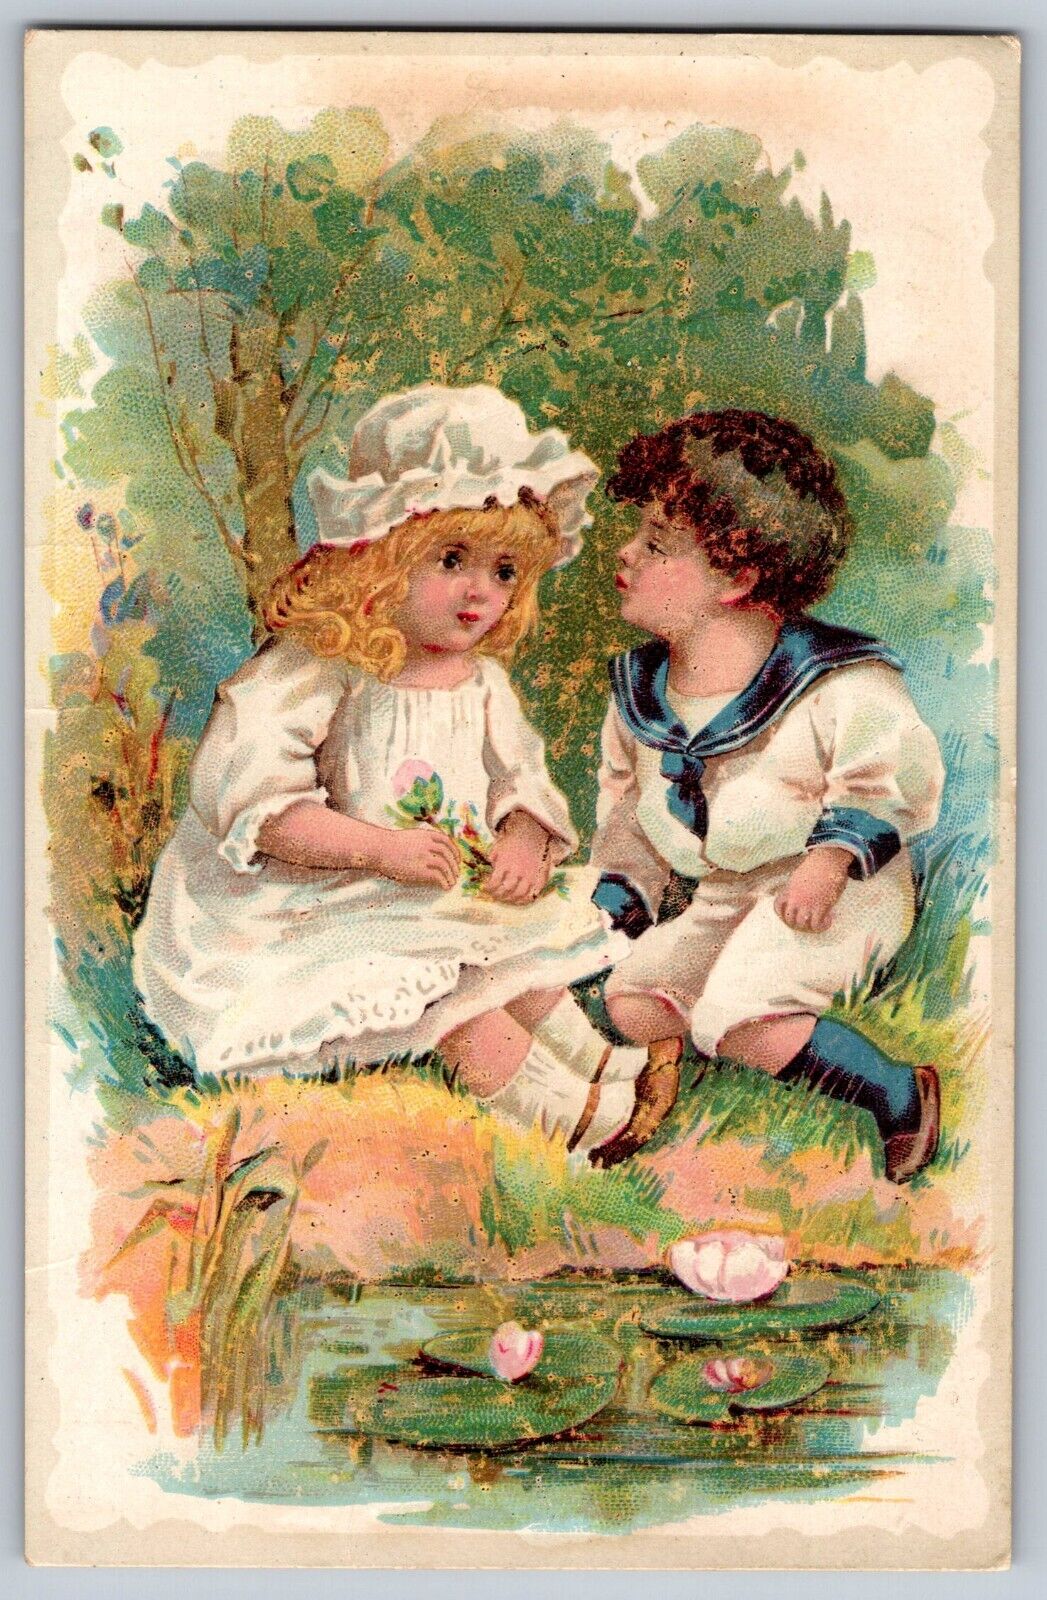 1899 Victorian Children Illustration Trade Card - Vintage Collectible Blank Card